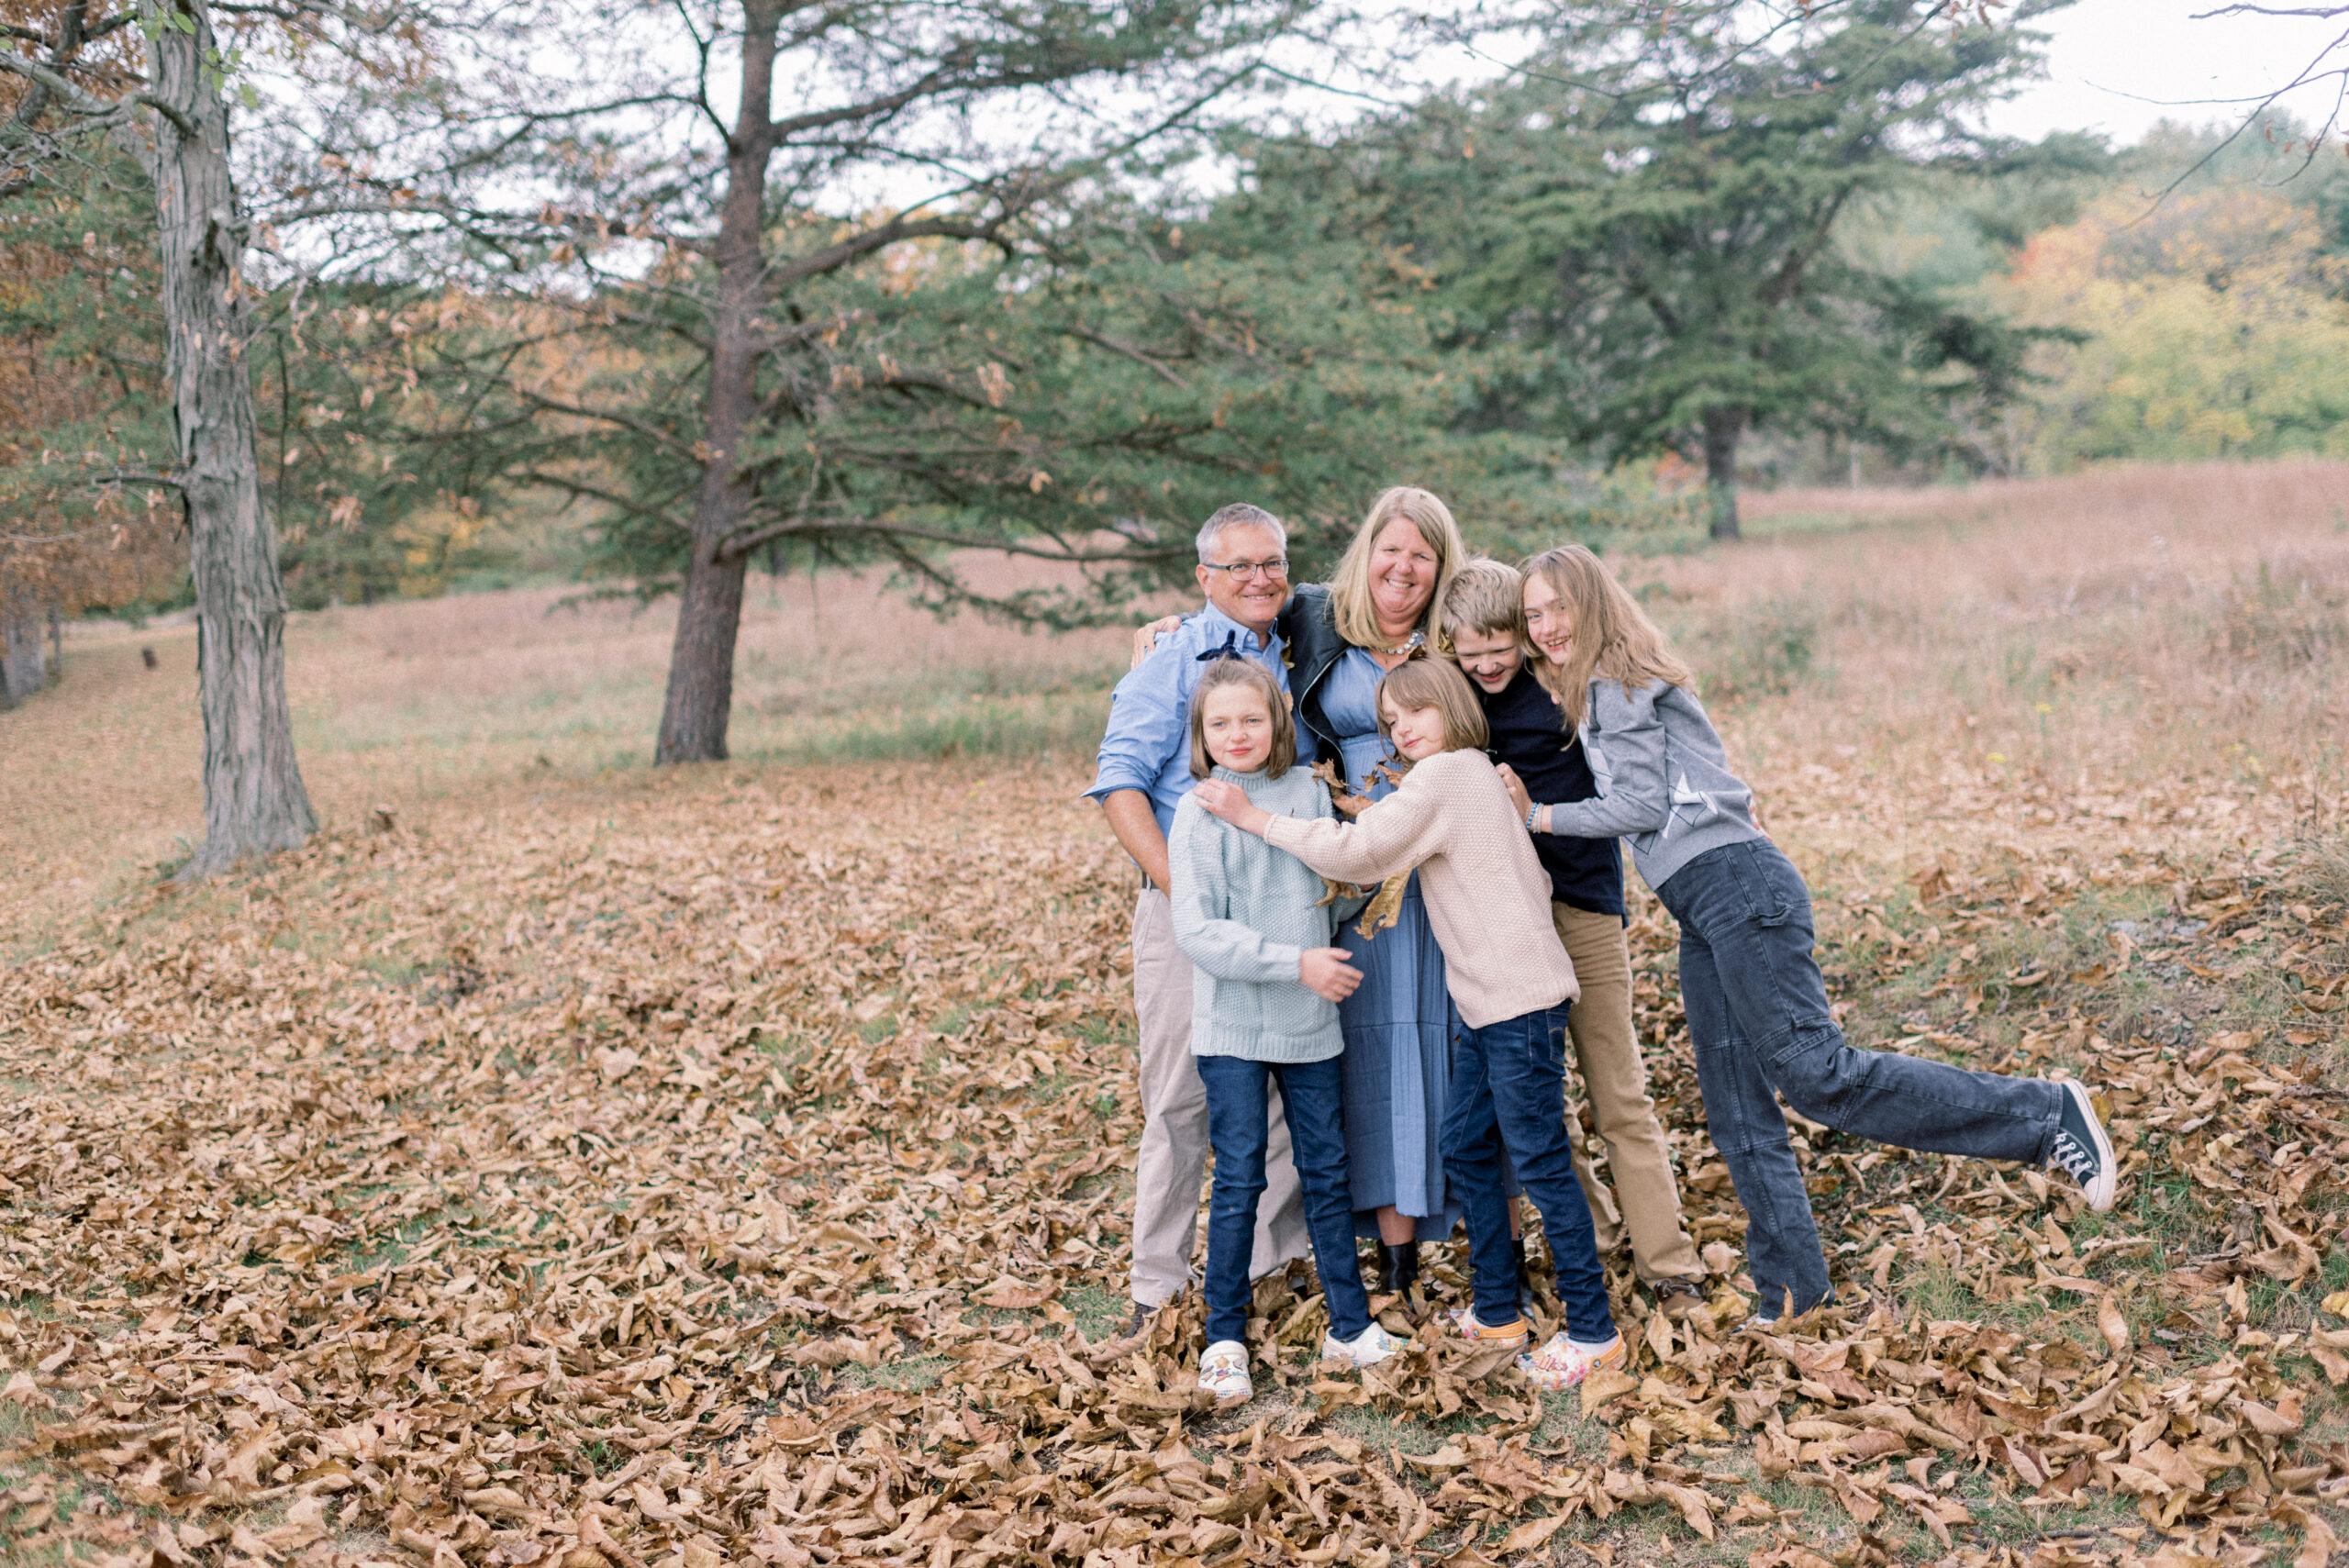 Pennsylvania photographer captures family playing in leaves together